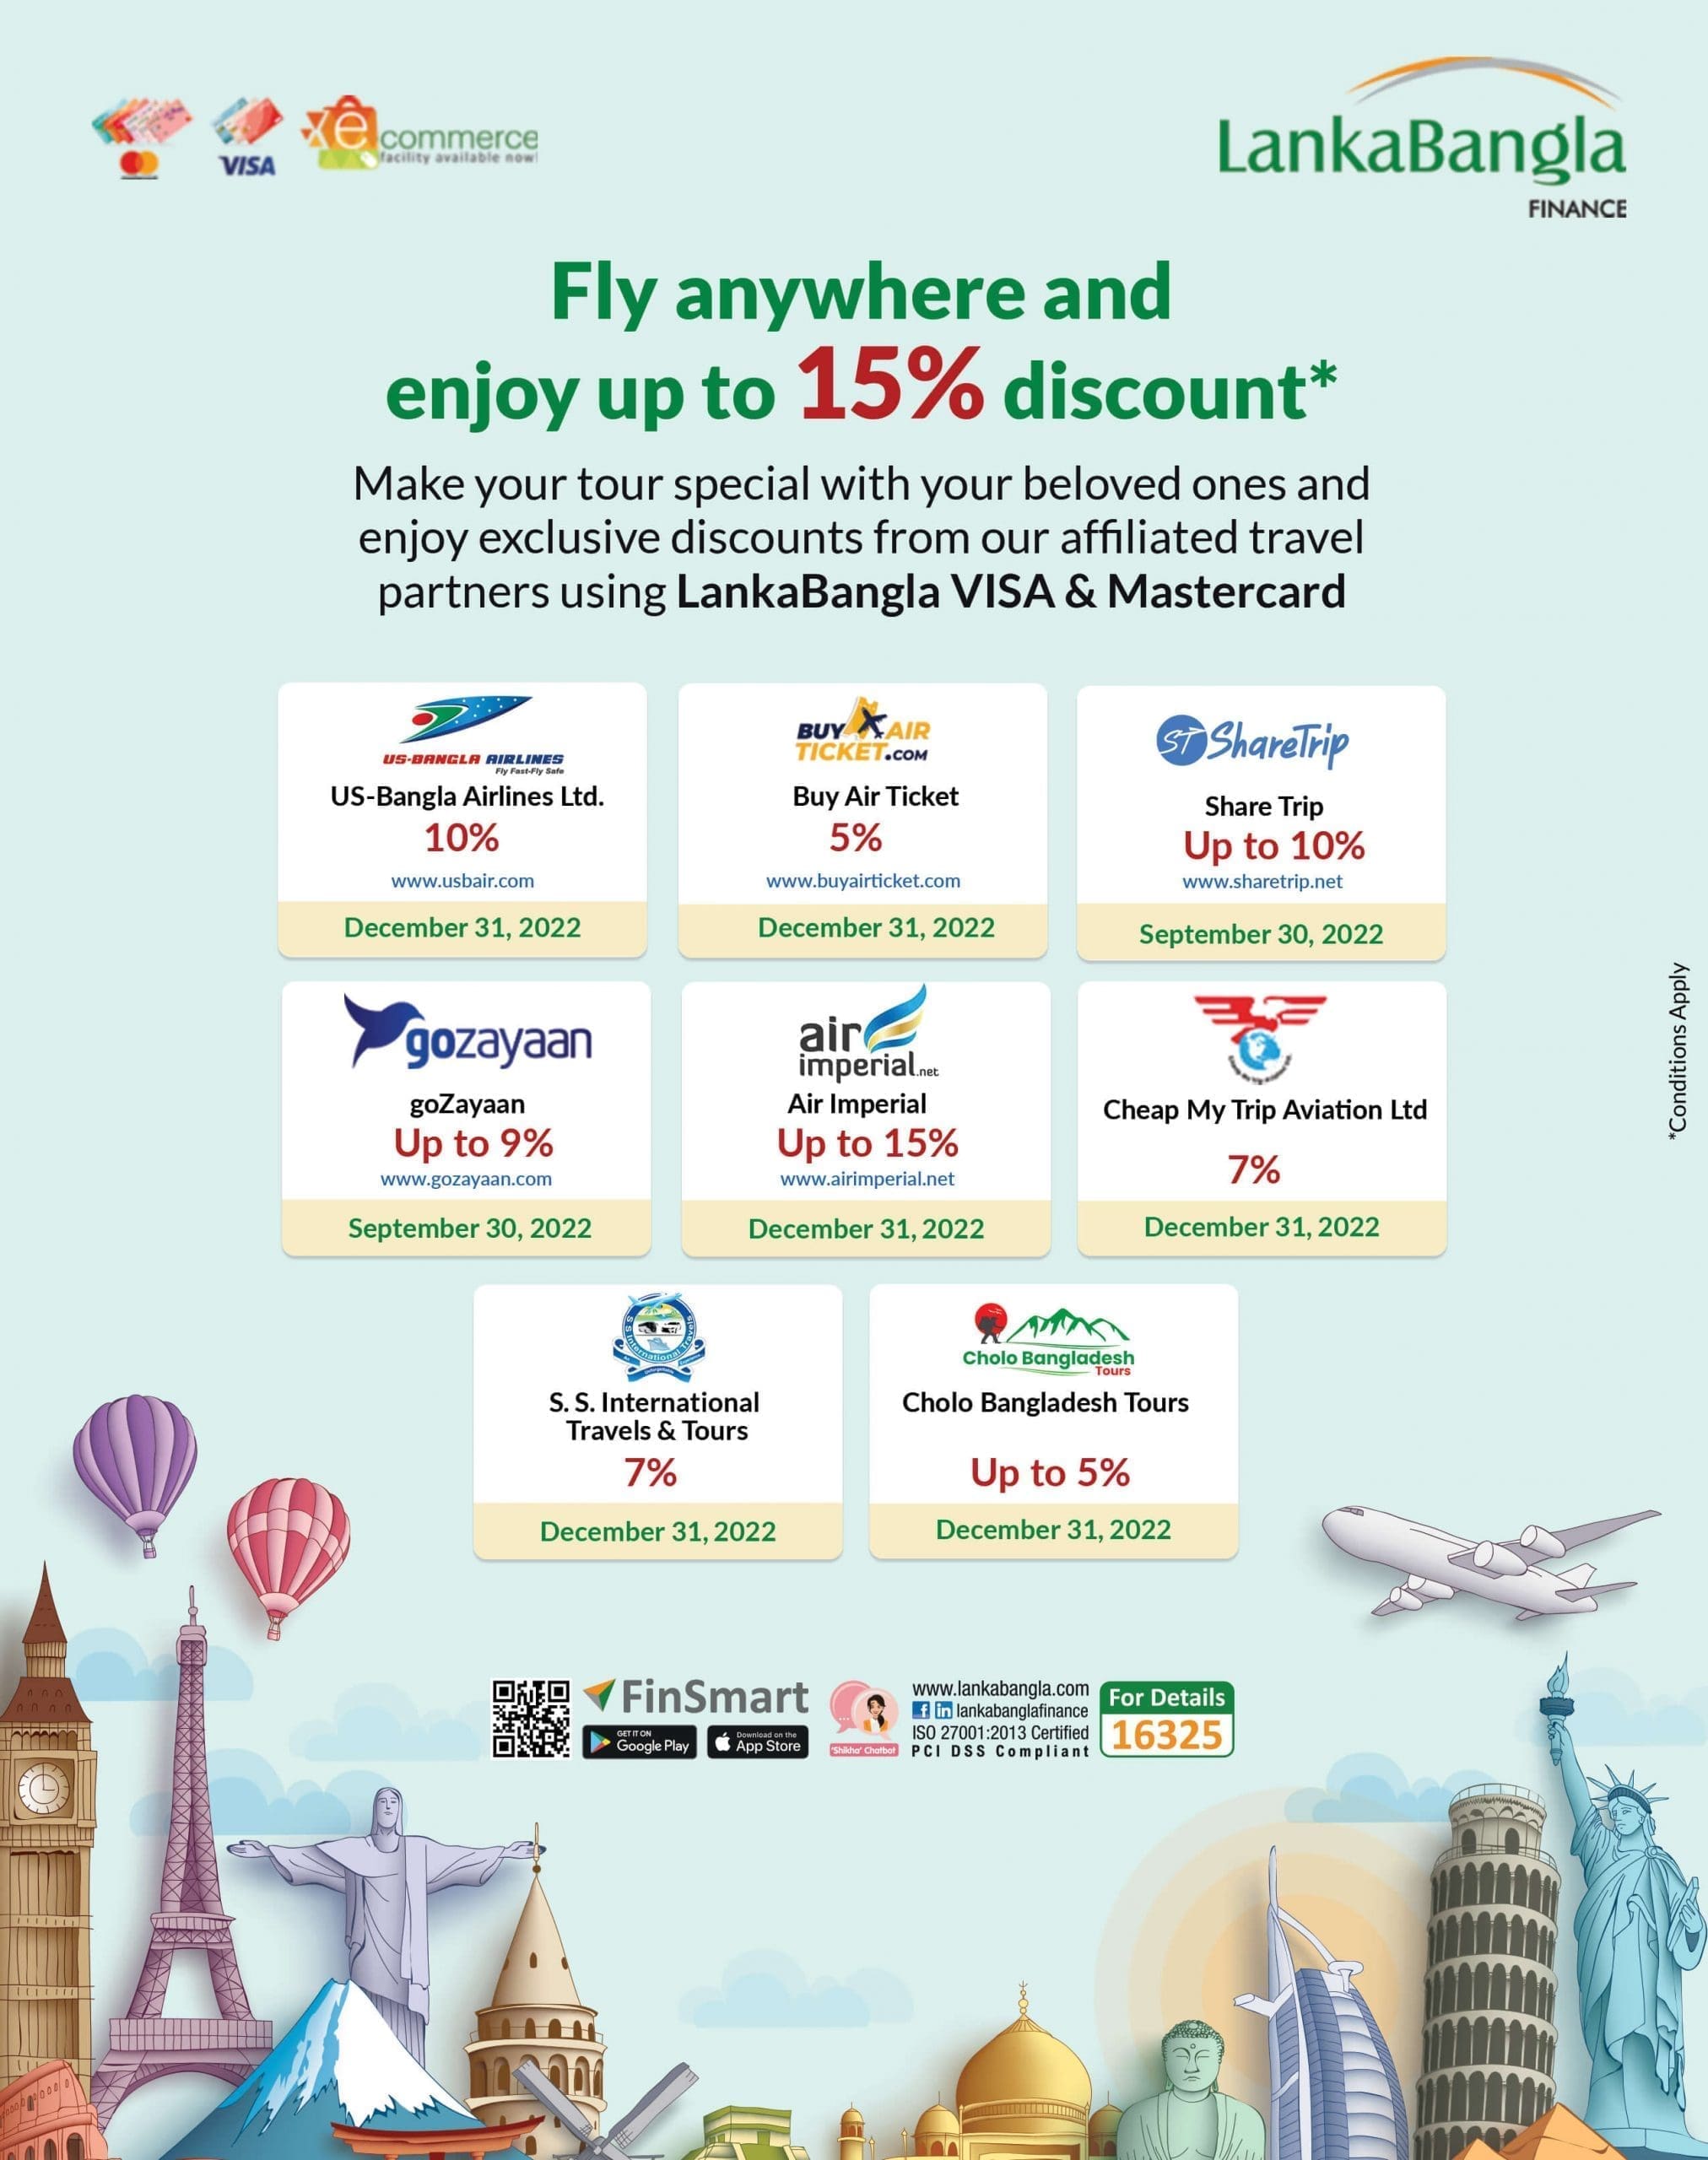 Fly anywhere and enjoy up to 15% discount